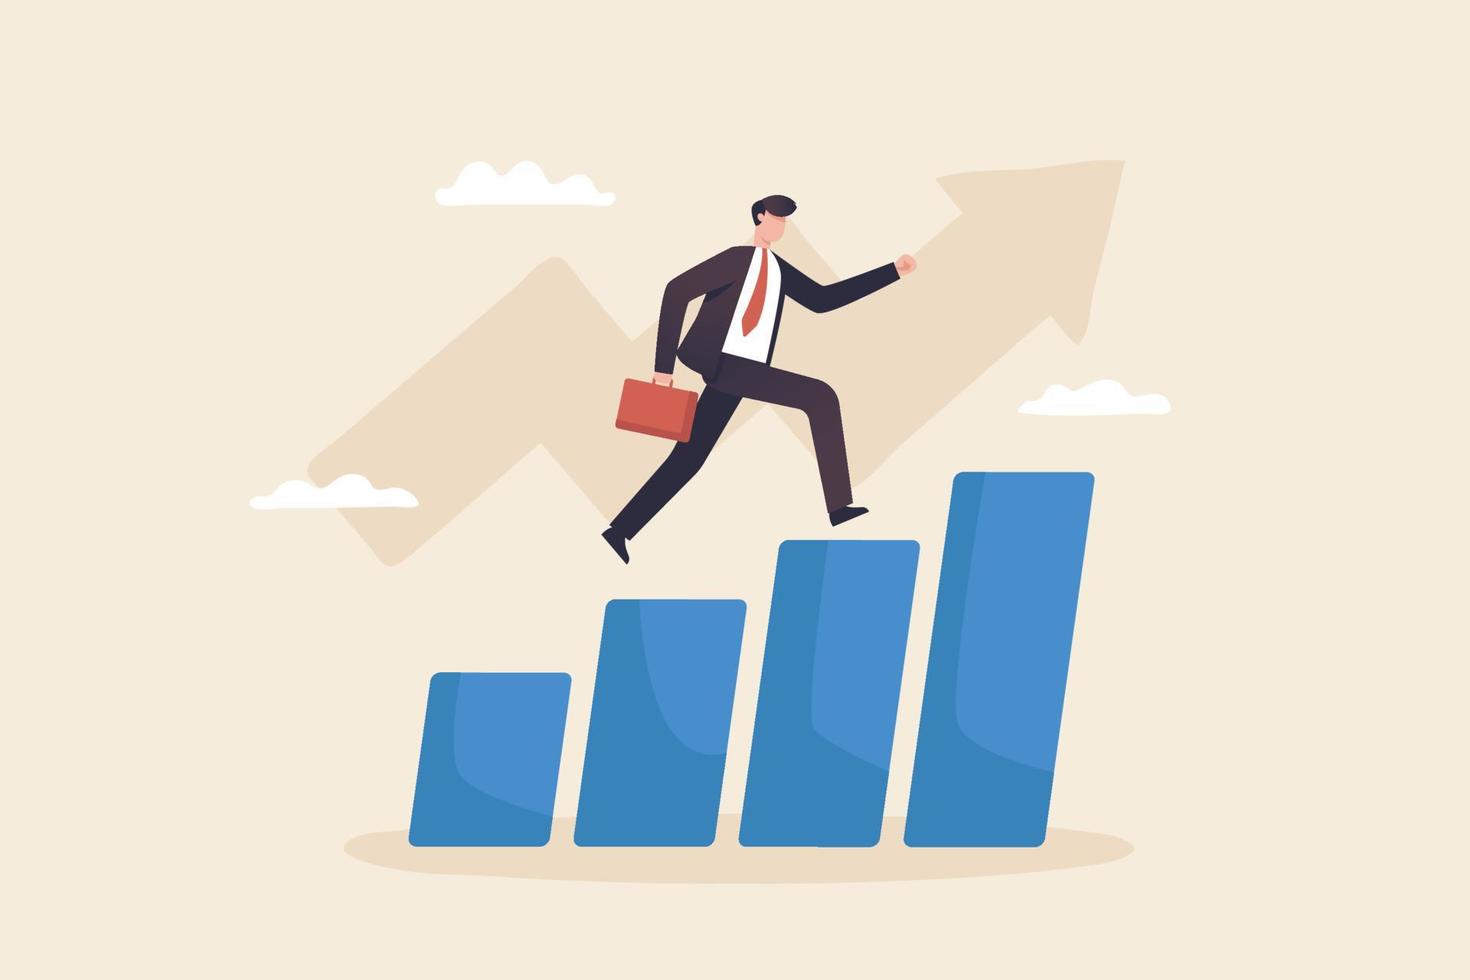 Successful investors, growth chart, investment strategies, portfolios, income gains, earn more, financial management. Businessman running on bar chart. vector